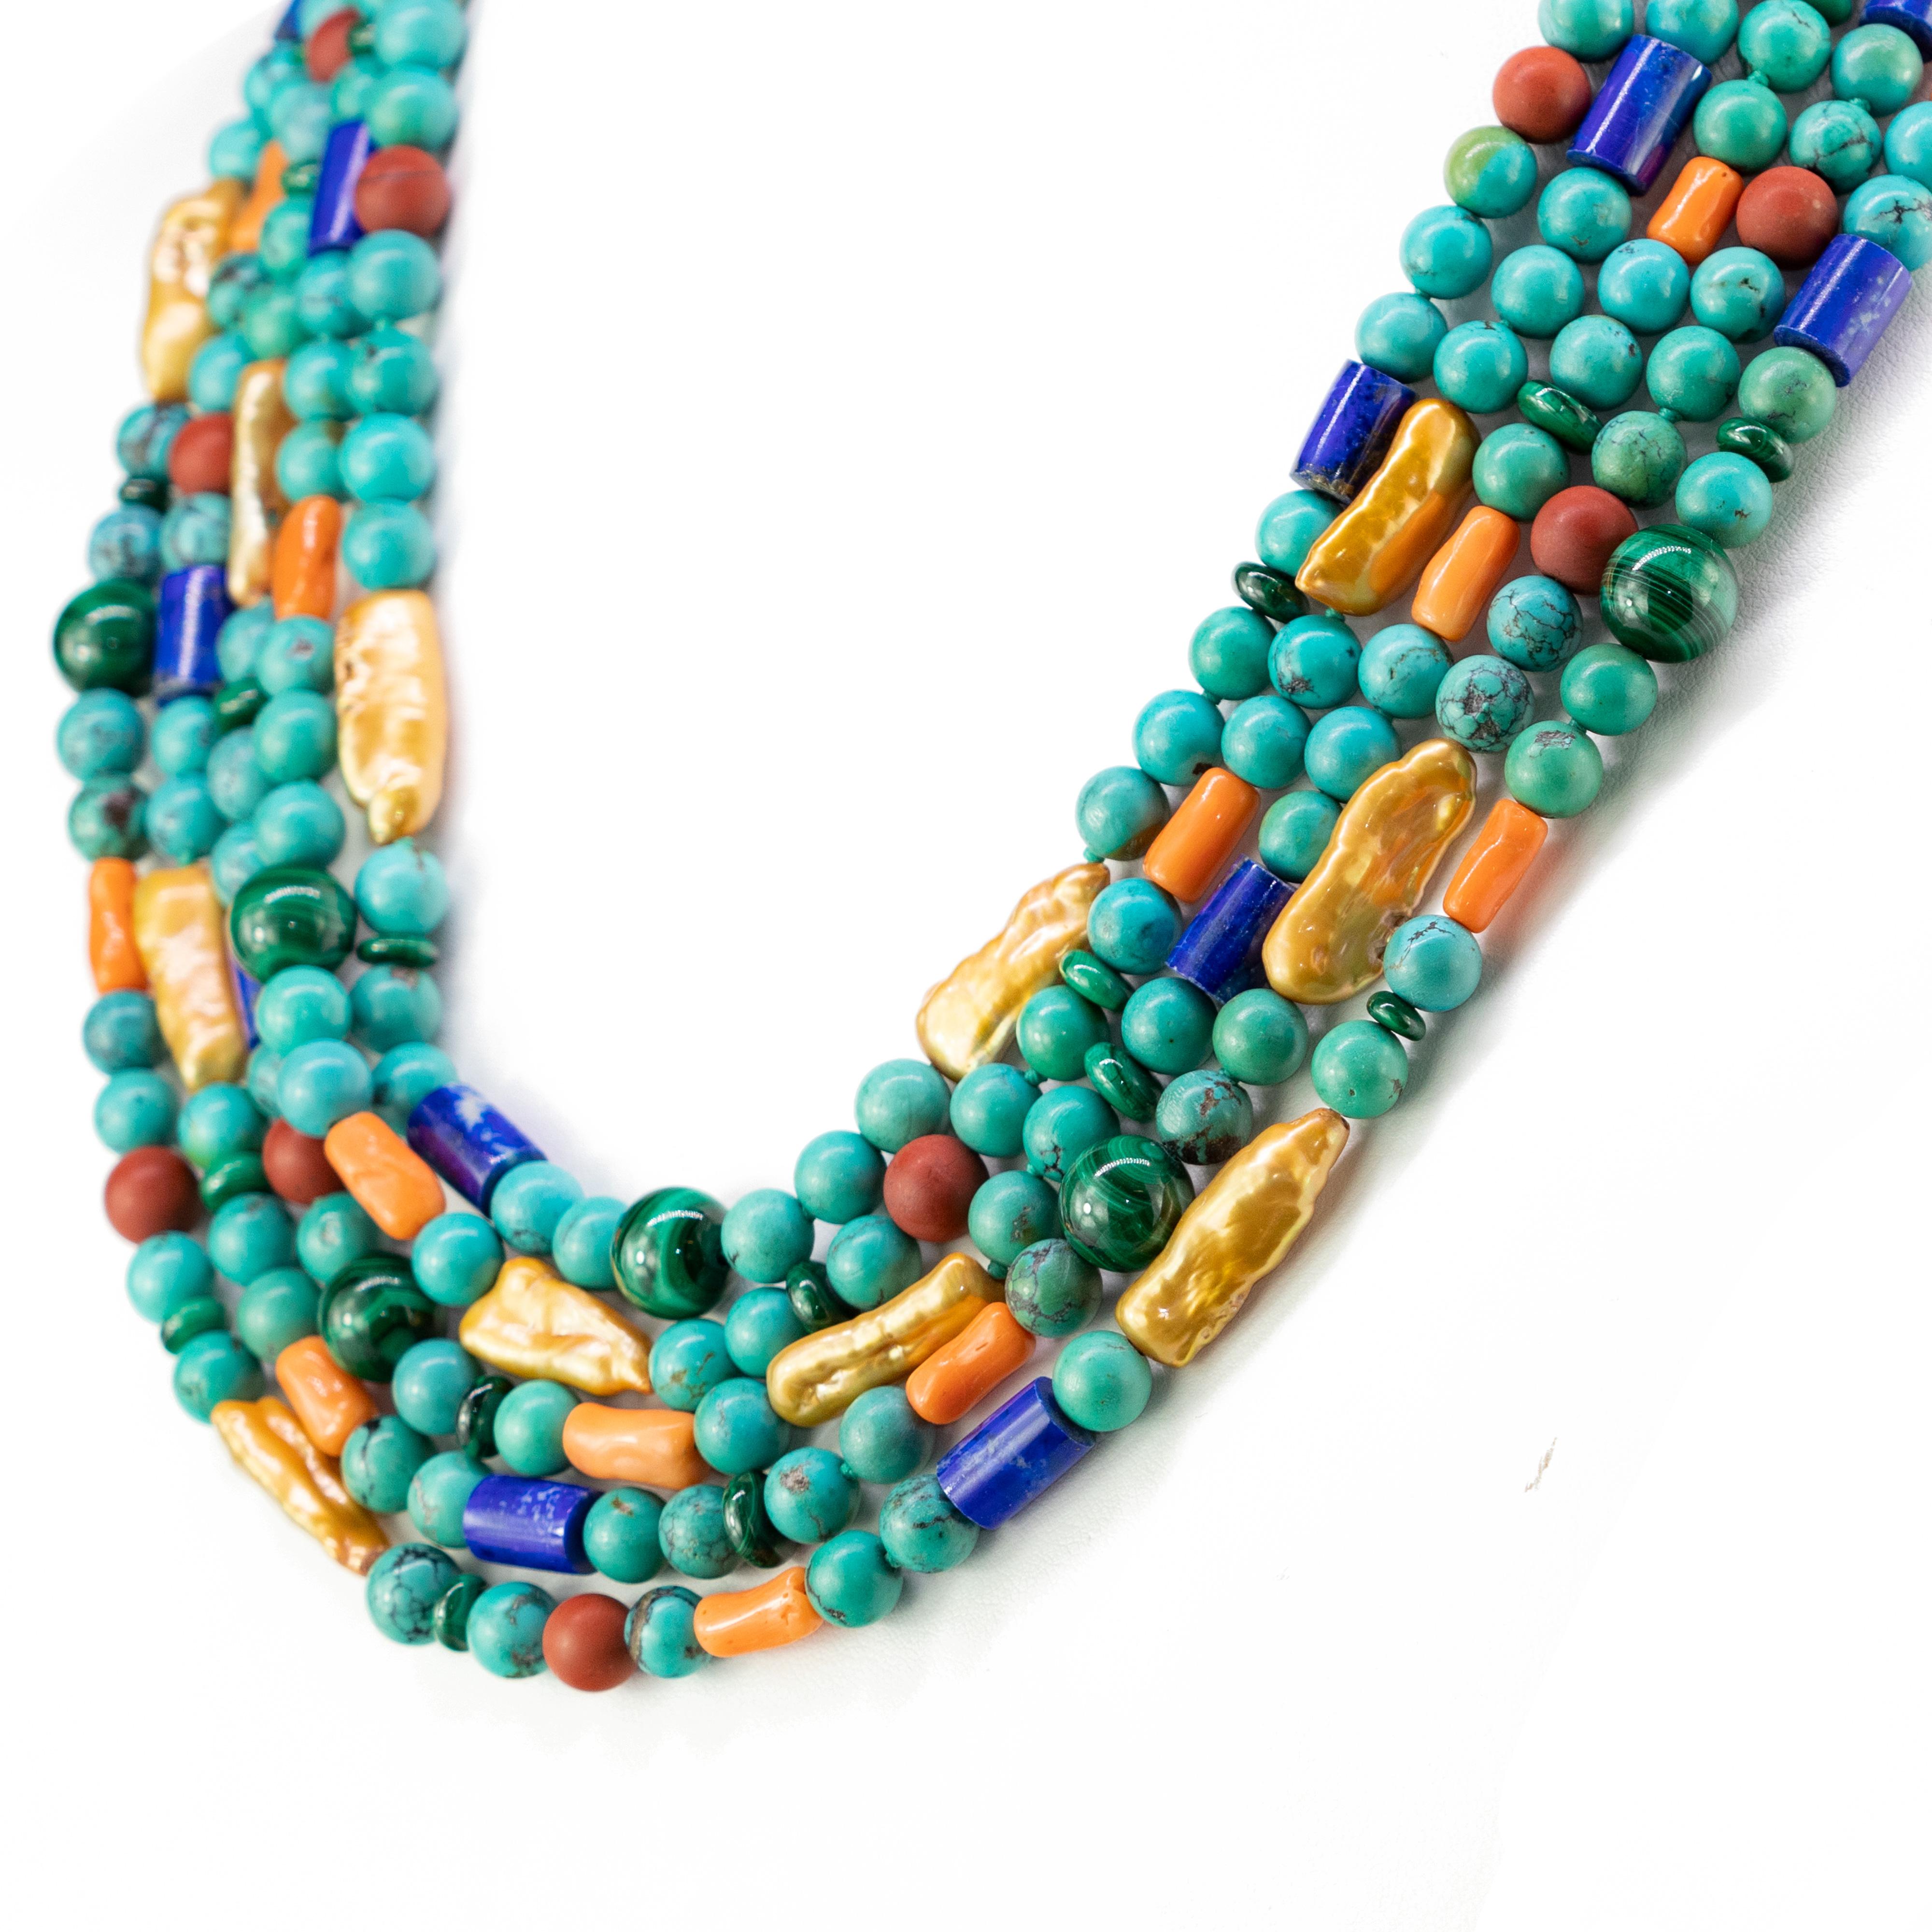 Inspired by the treasures of ancient Europe, this summer vibe necklace is made with natural turquoises , lapis lazuli, pearls, pink coral, malachite and satin carnelian.

Is inspired by the magnificent Swiss landscapes during the summer. The green